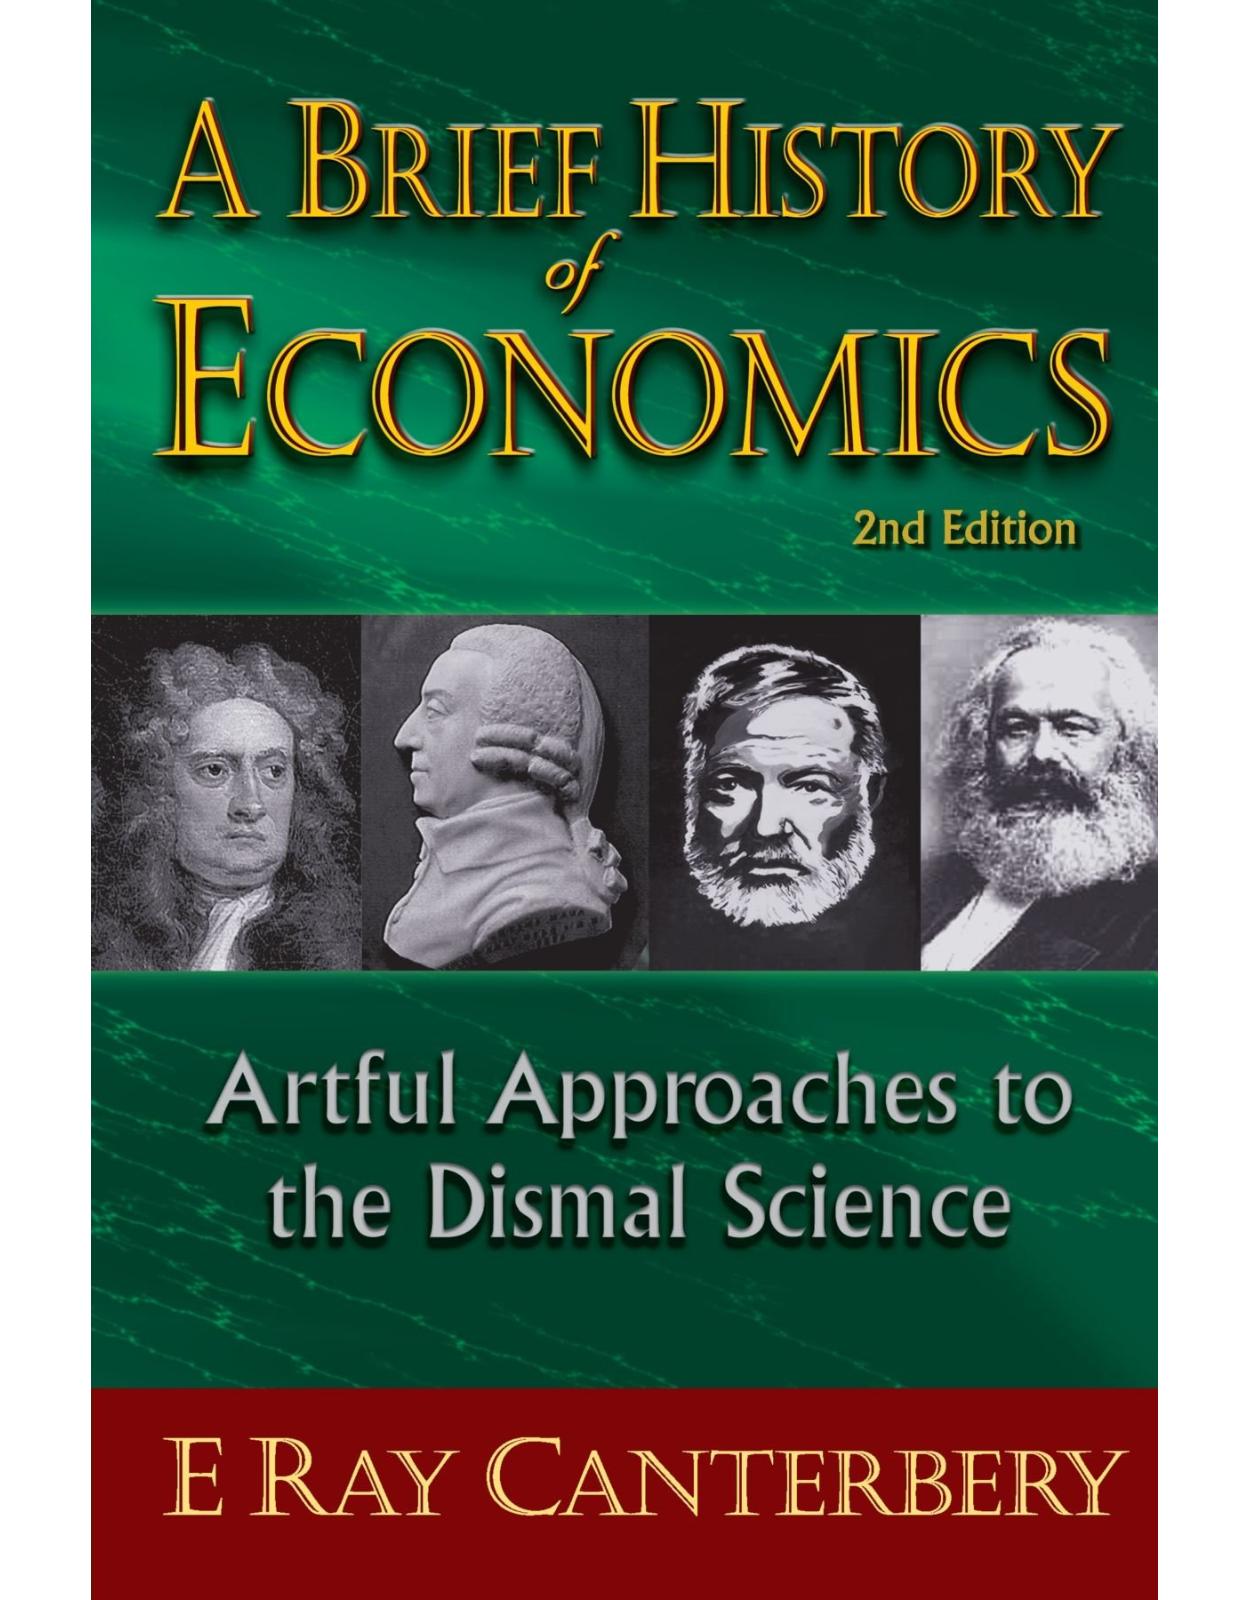 Brief history of economics, a: artful approaches to the dismal science (2nd edition)